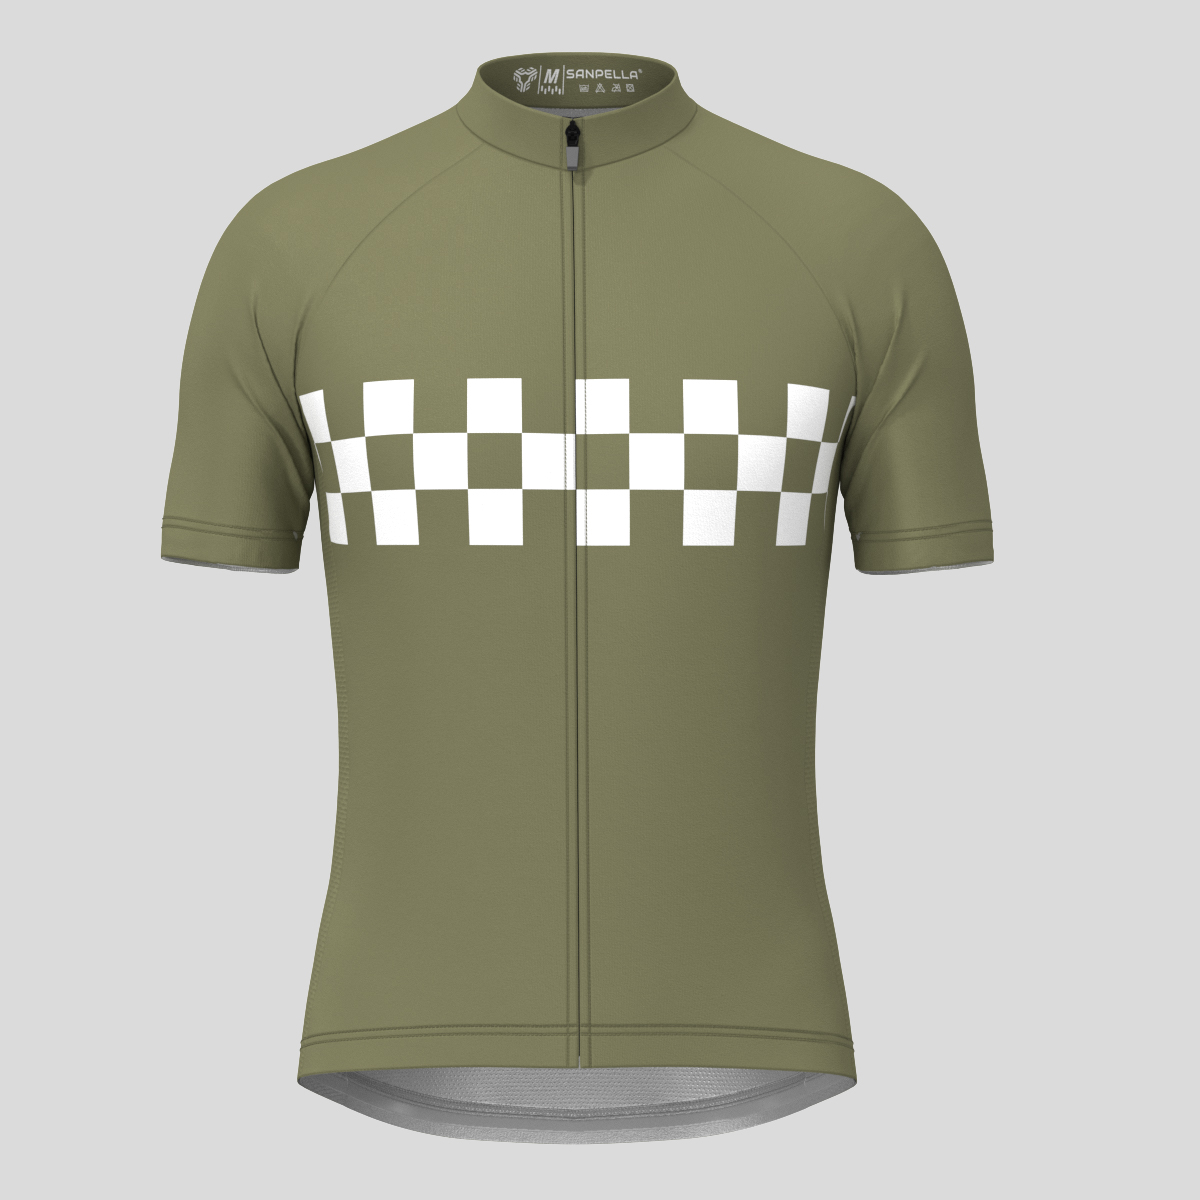 Men's Checkered Flag Retro Cycling Jersey - Olive